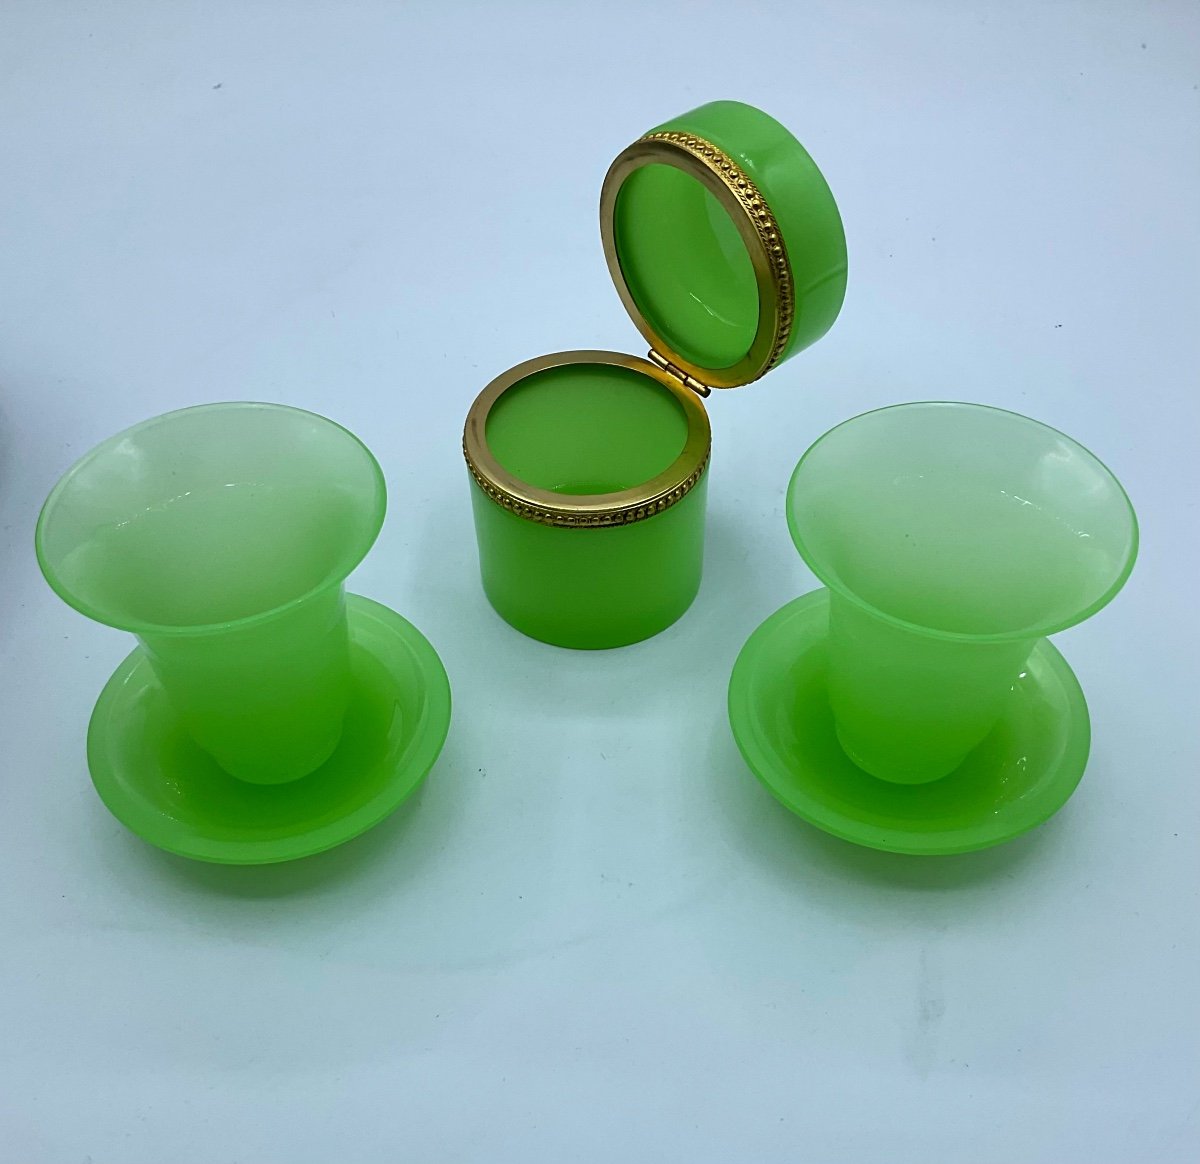 Antique French Opaline Glass Box And 2 Small Vases With Dishes In Lime Green-photo-2